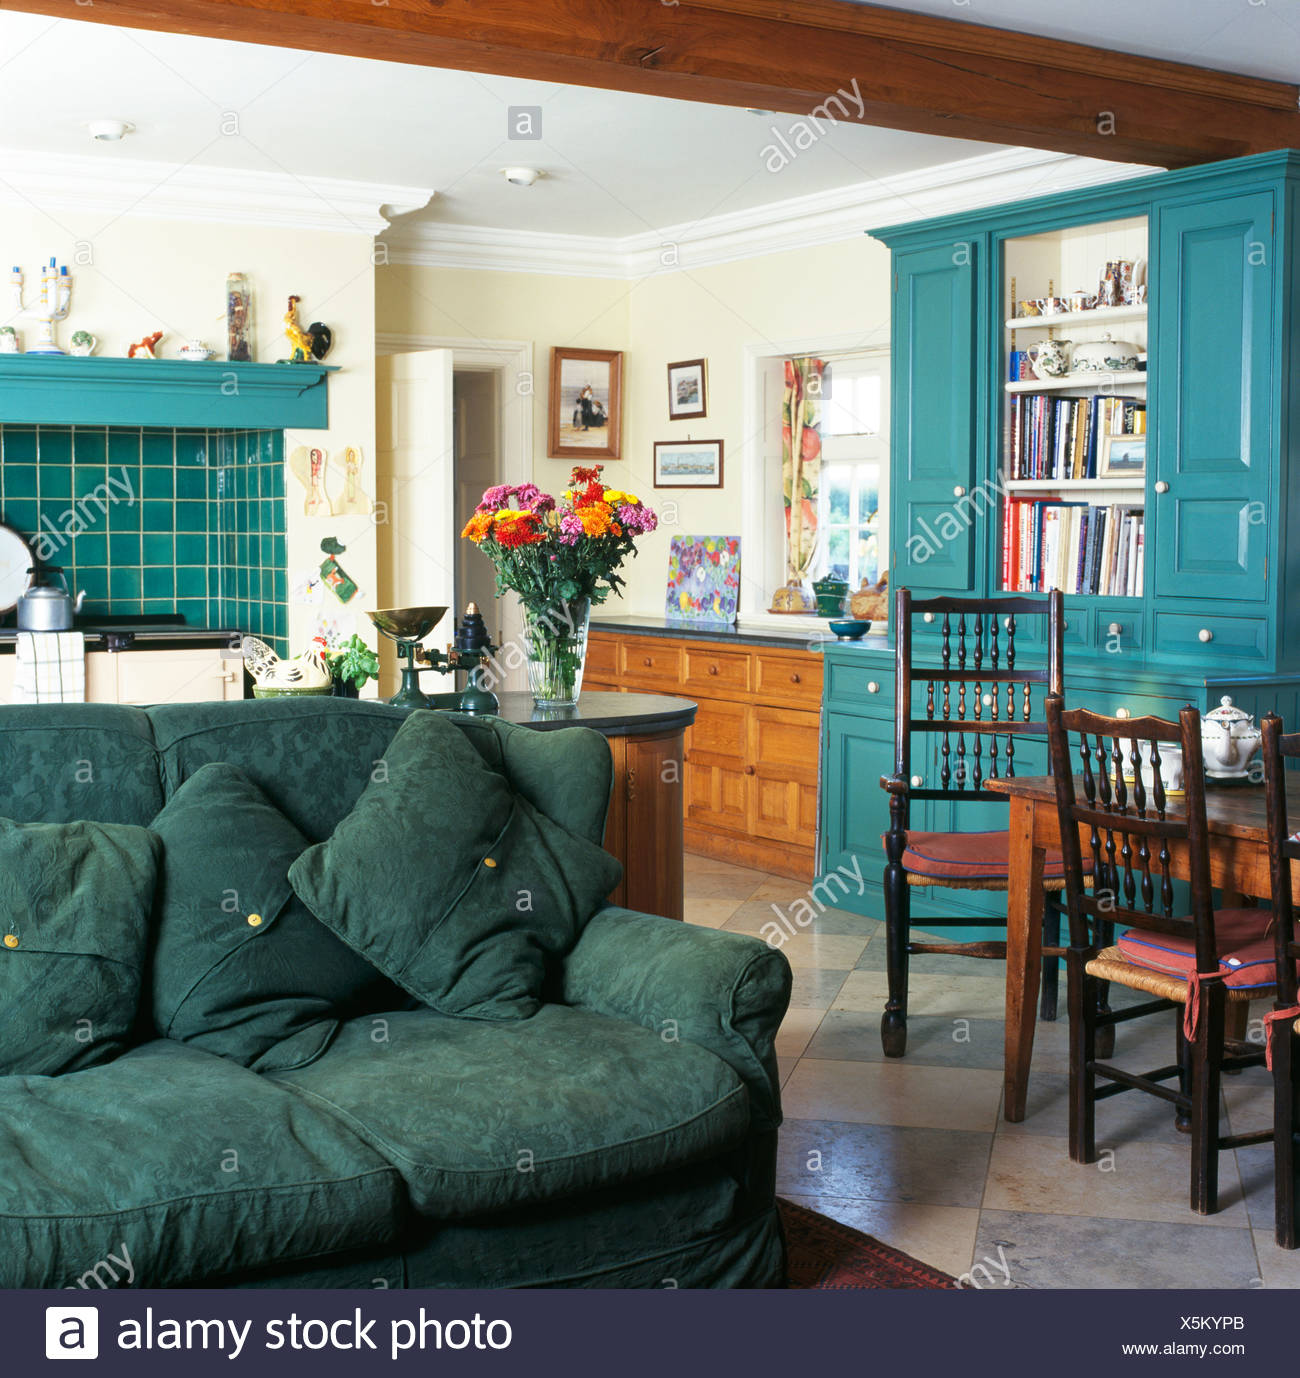 Green Sofa In Traditional Country Kitchen Dining Room With